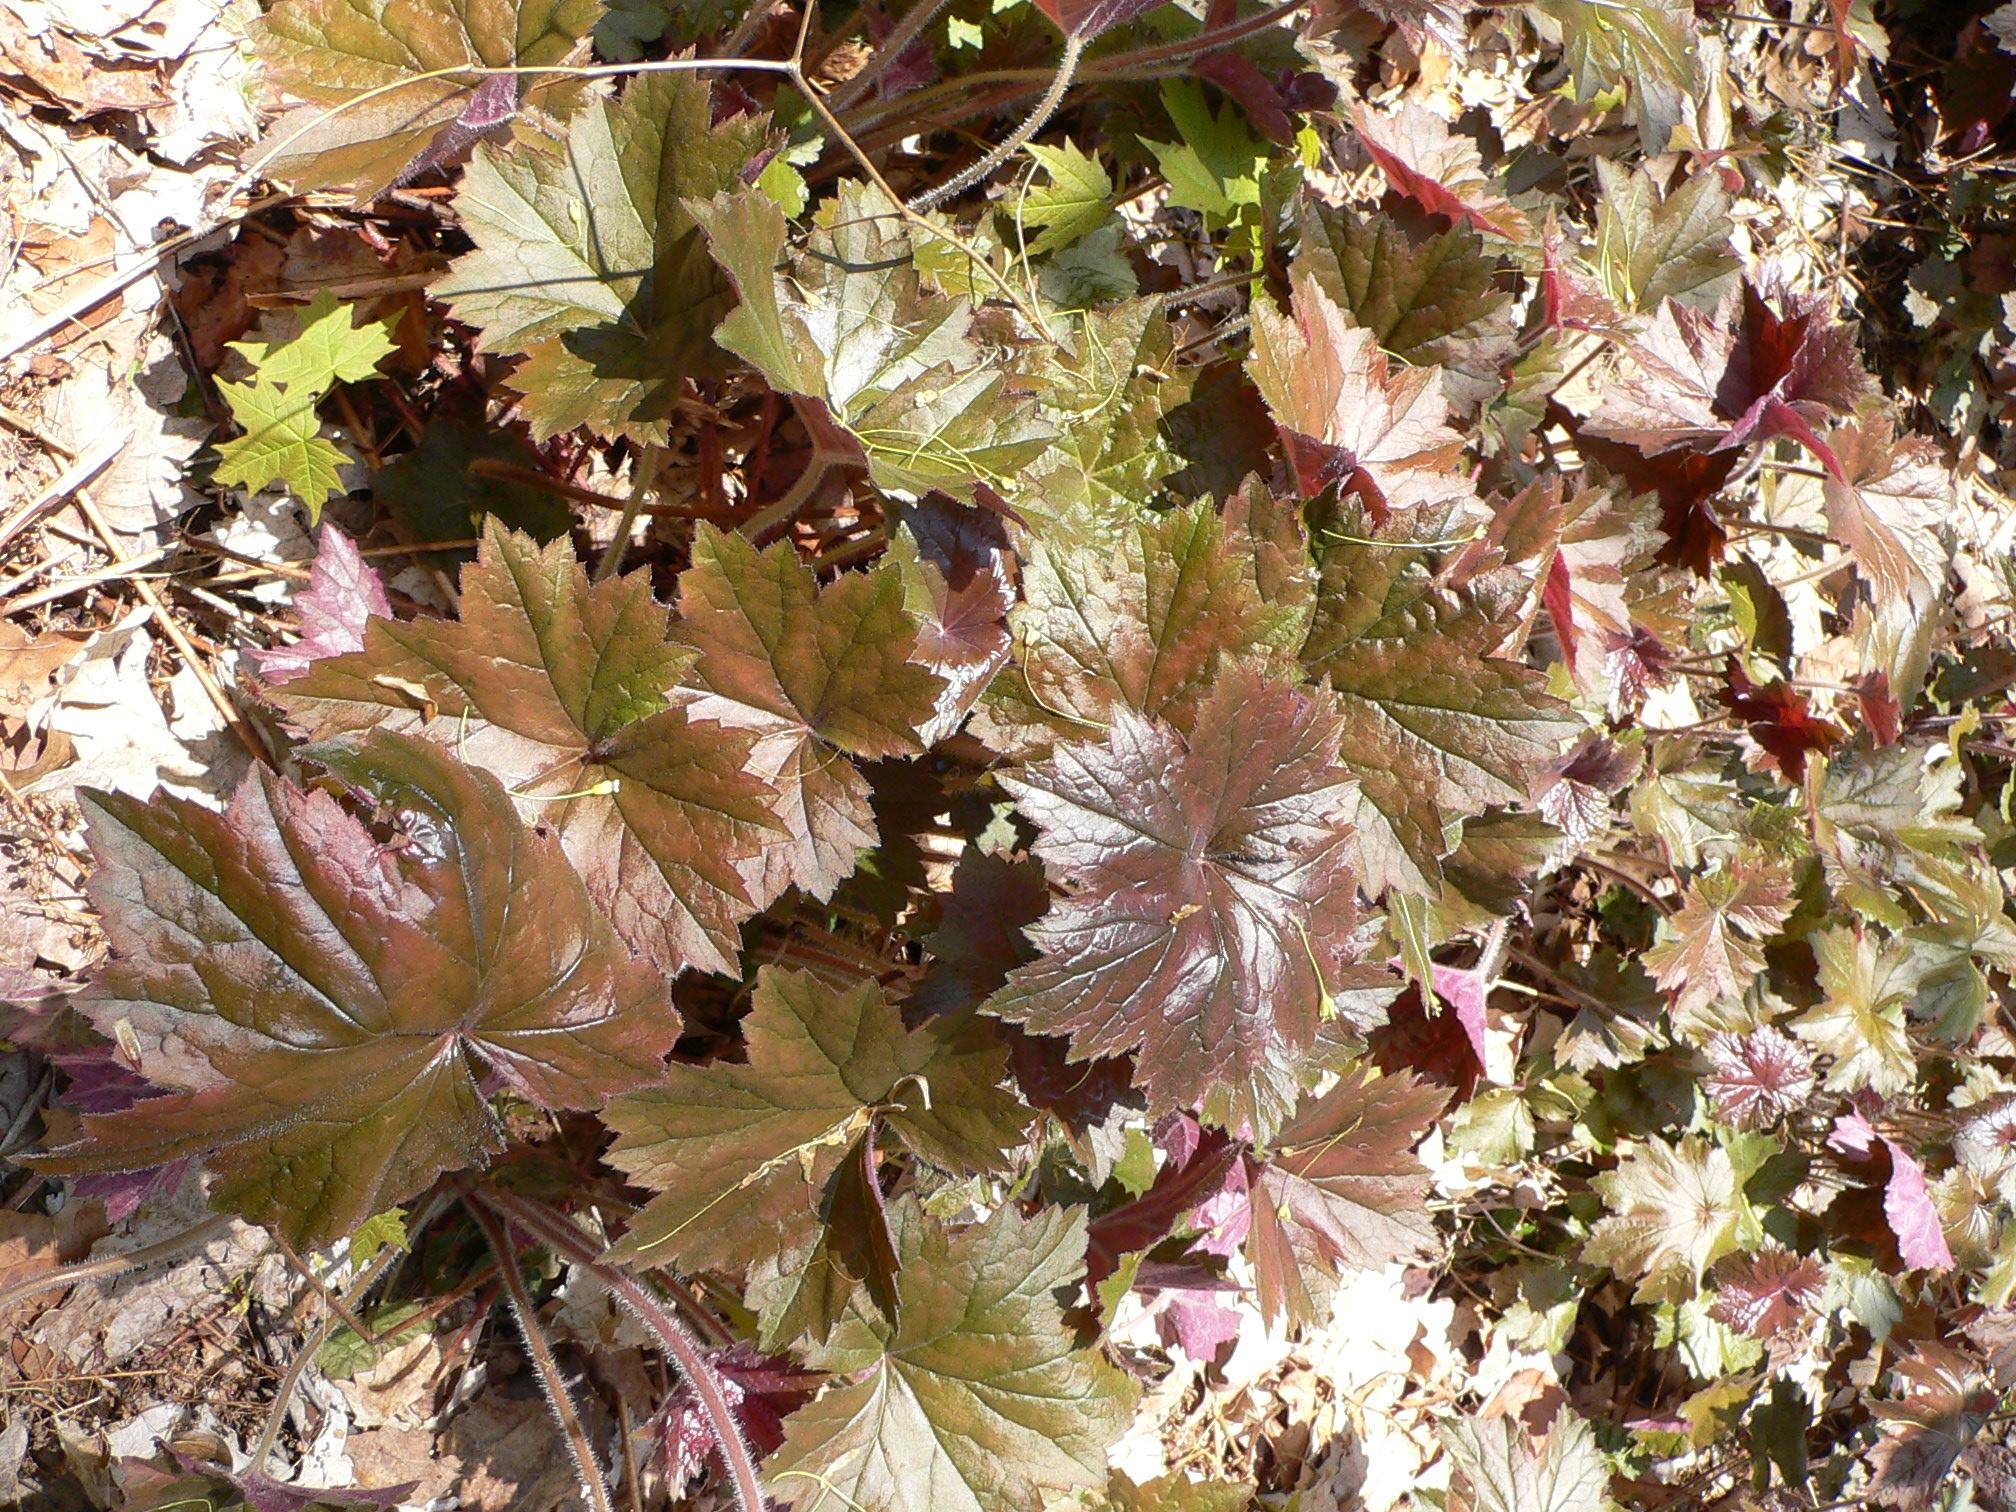 Green-brown leaves with light-brown stems and white hair.